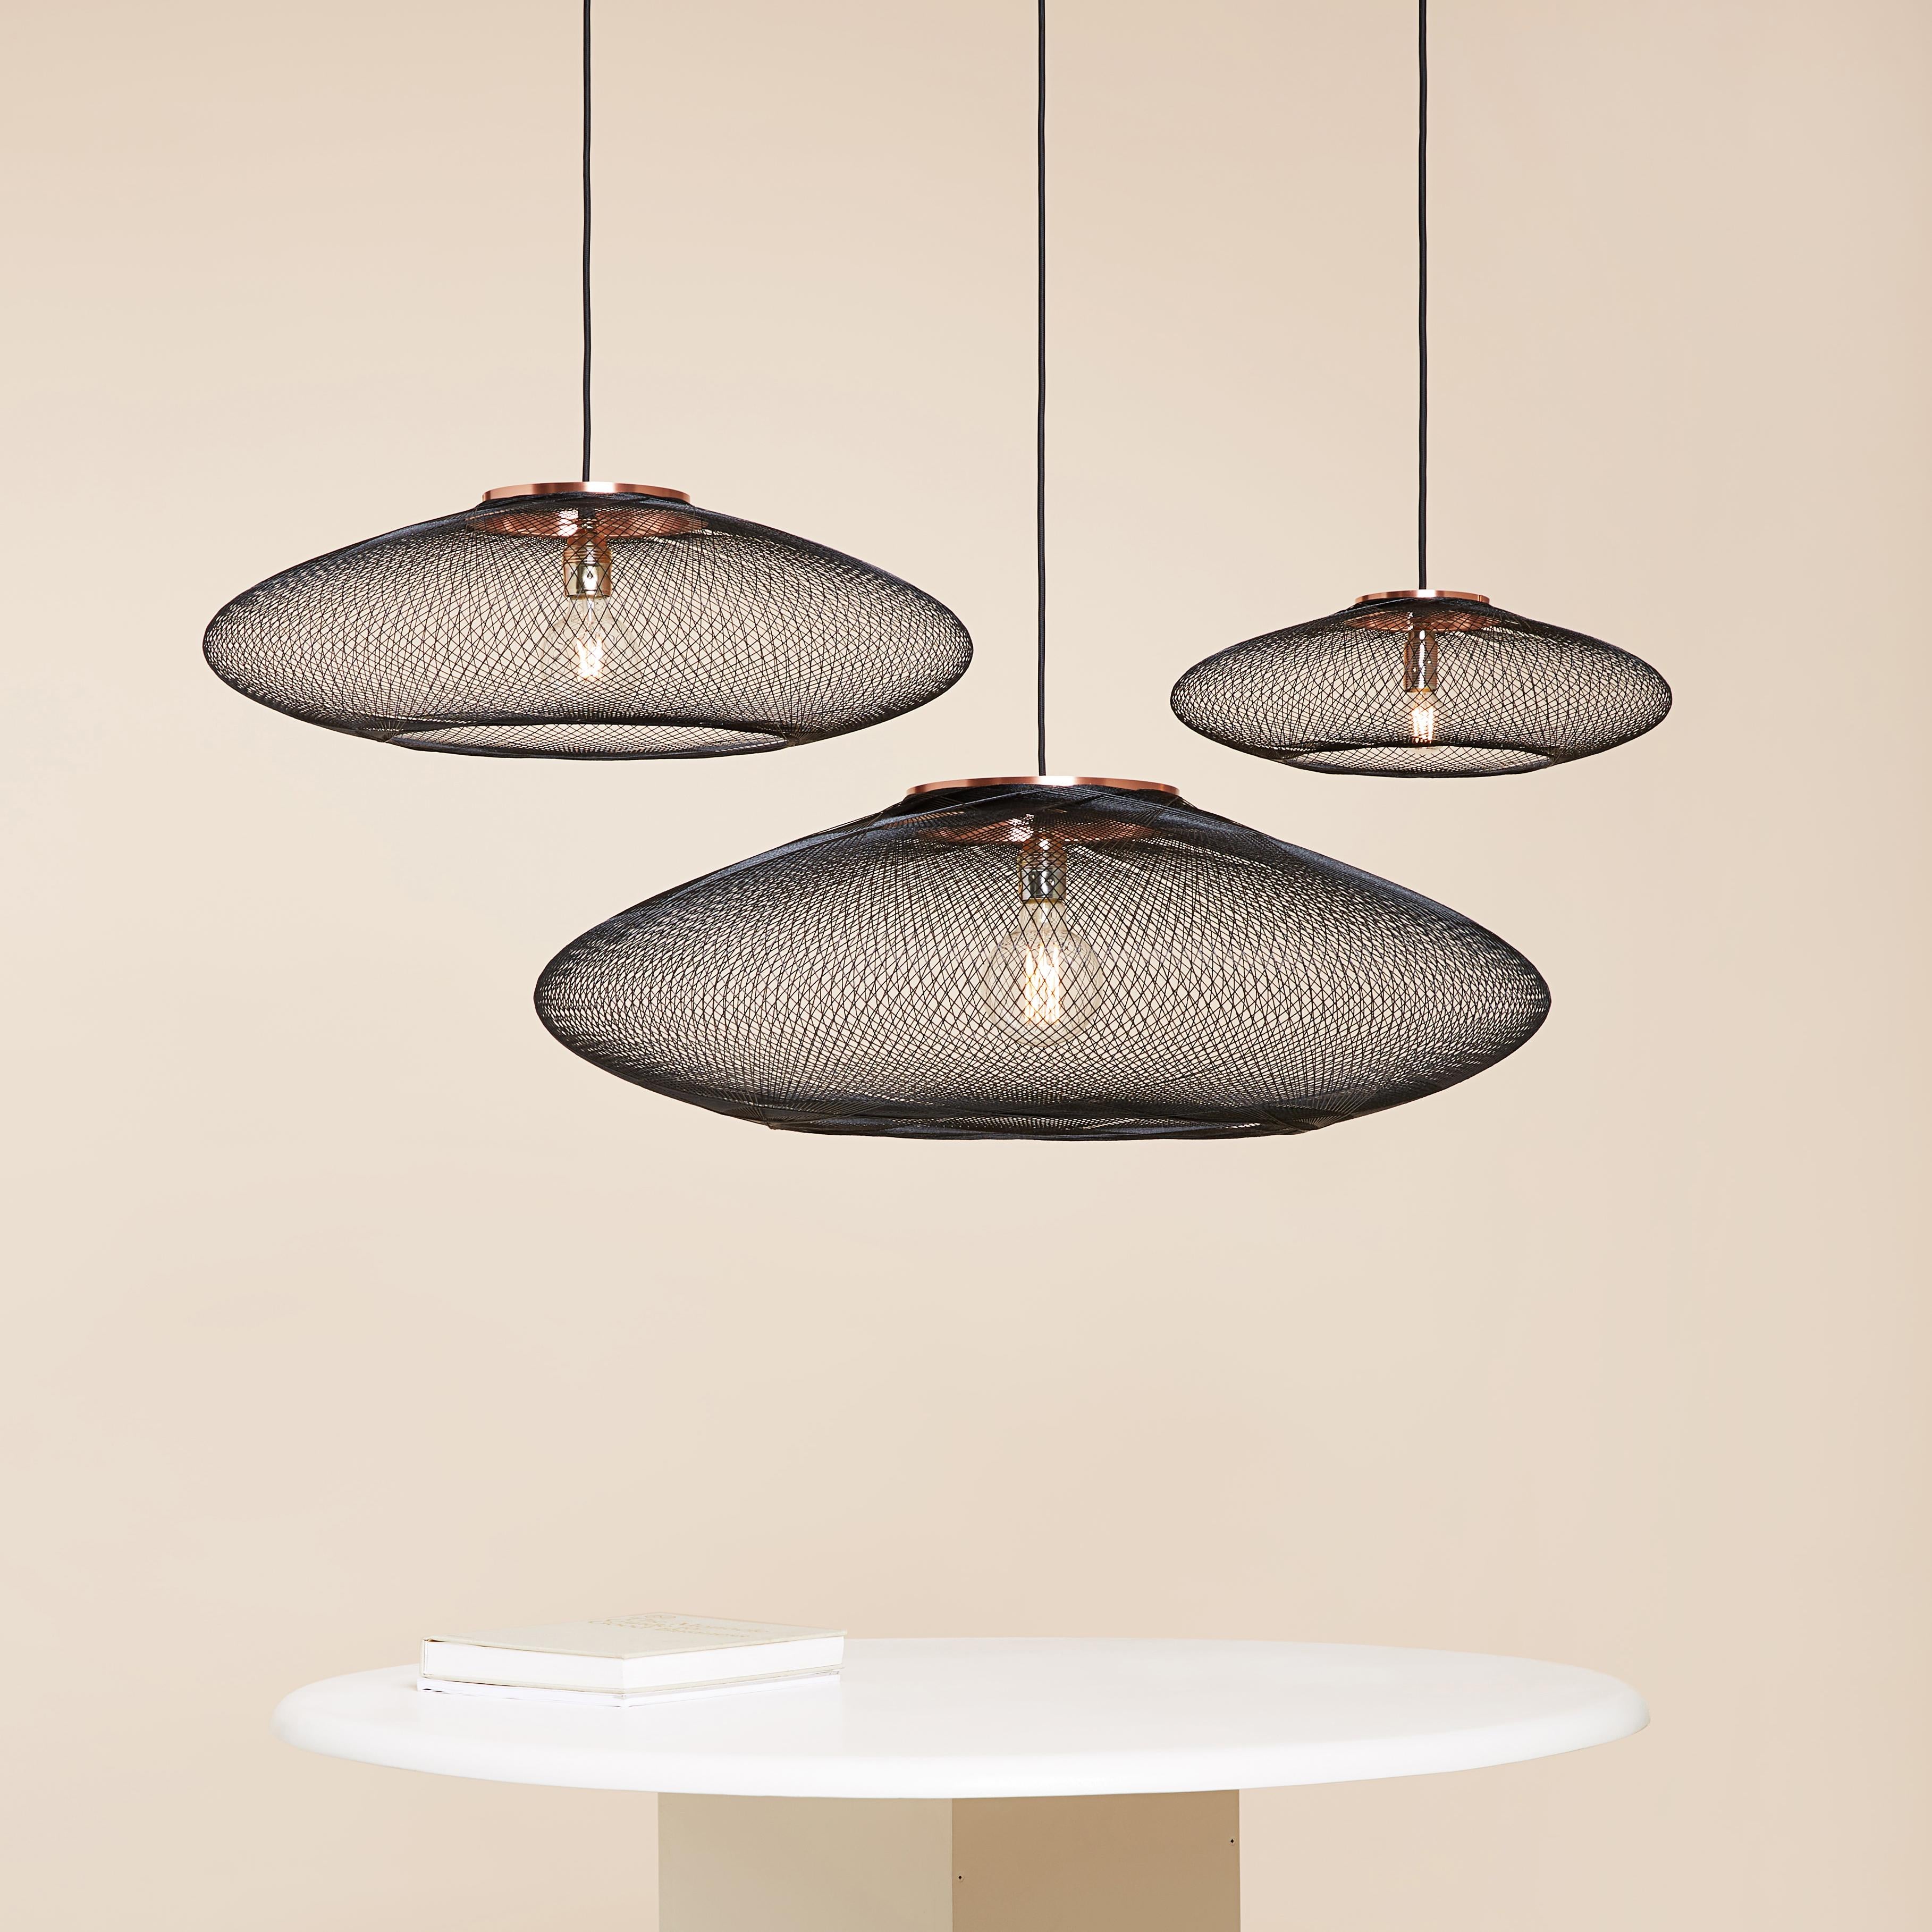 Large back UFO pendant lamp by Atelier Robotiq
Dimensions: D 80 x H 24 cm
Materials: Resin-impregnated industrial fiber, copper.
Available with holder in copper/ brass/ black coated stainless steel.
Available in different colors, 3 sizes, and in